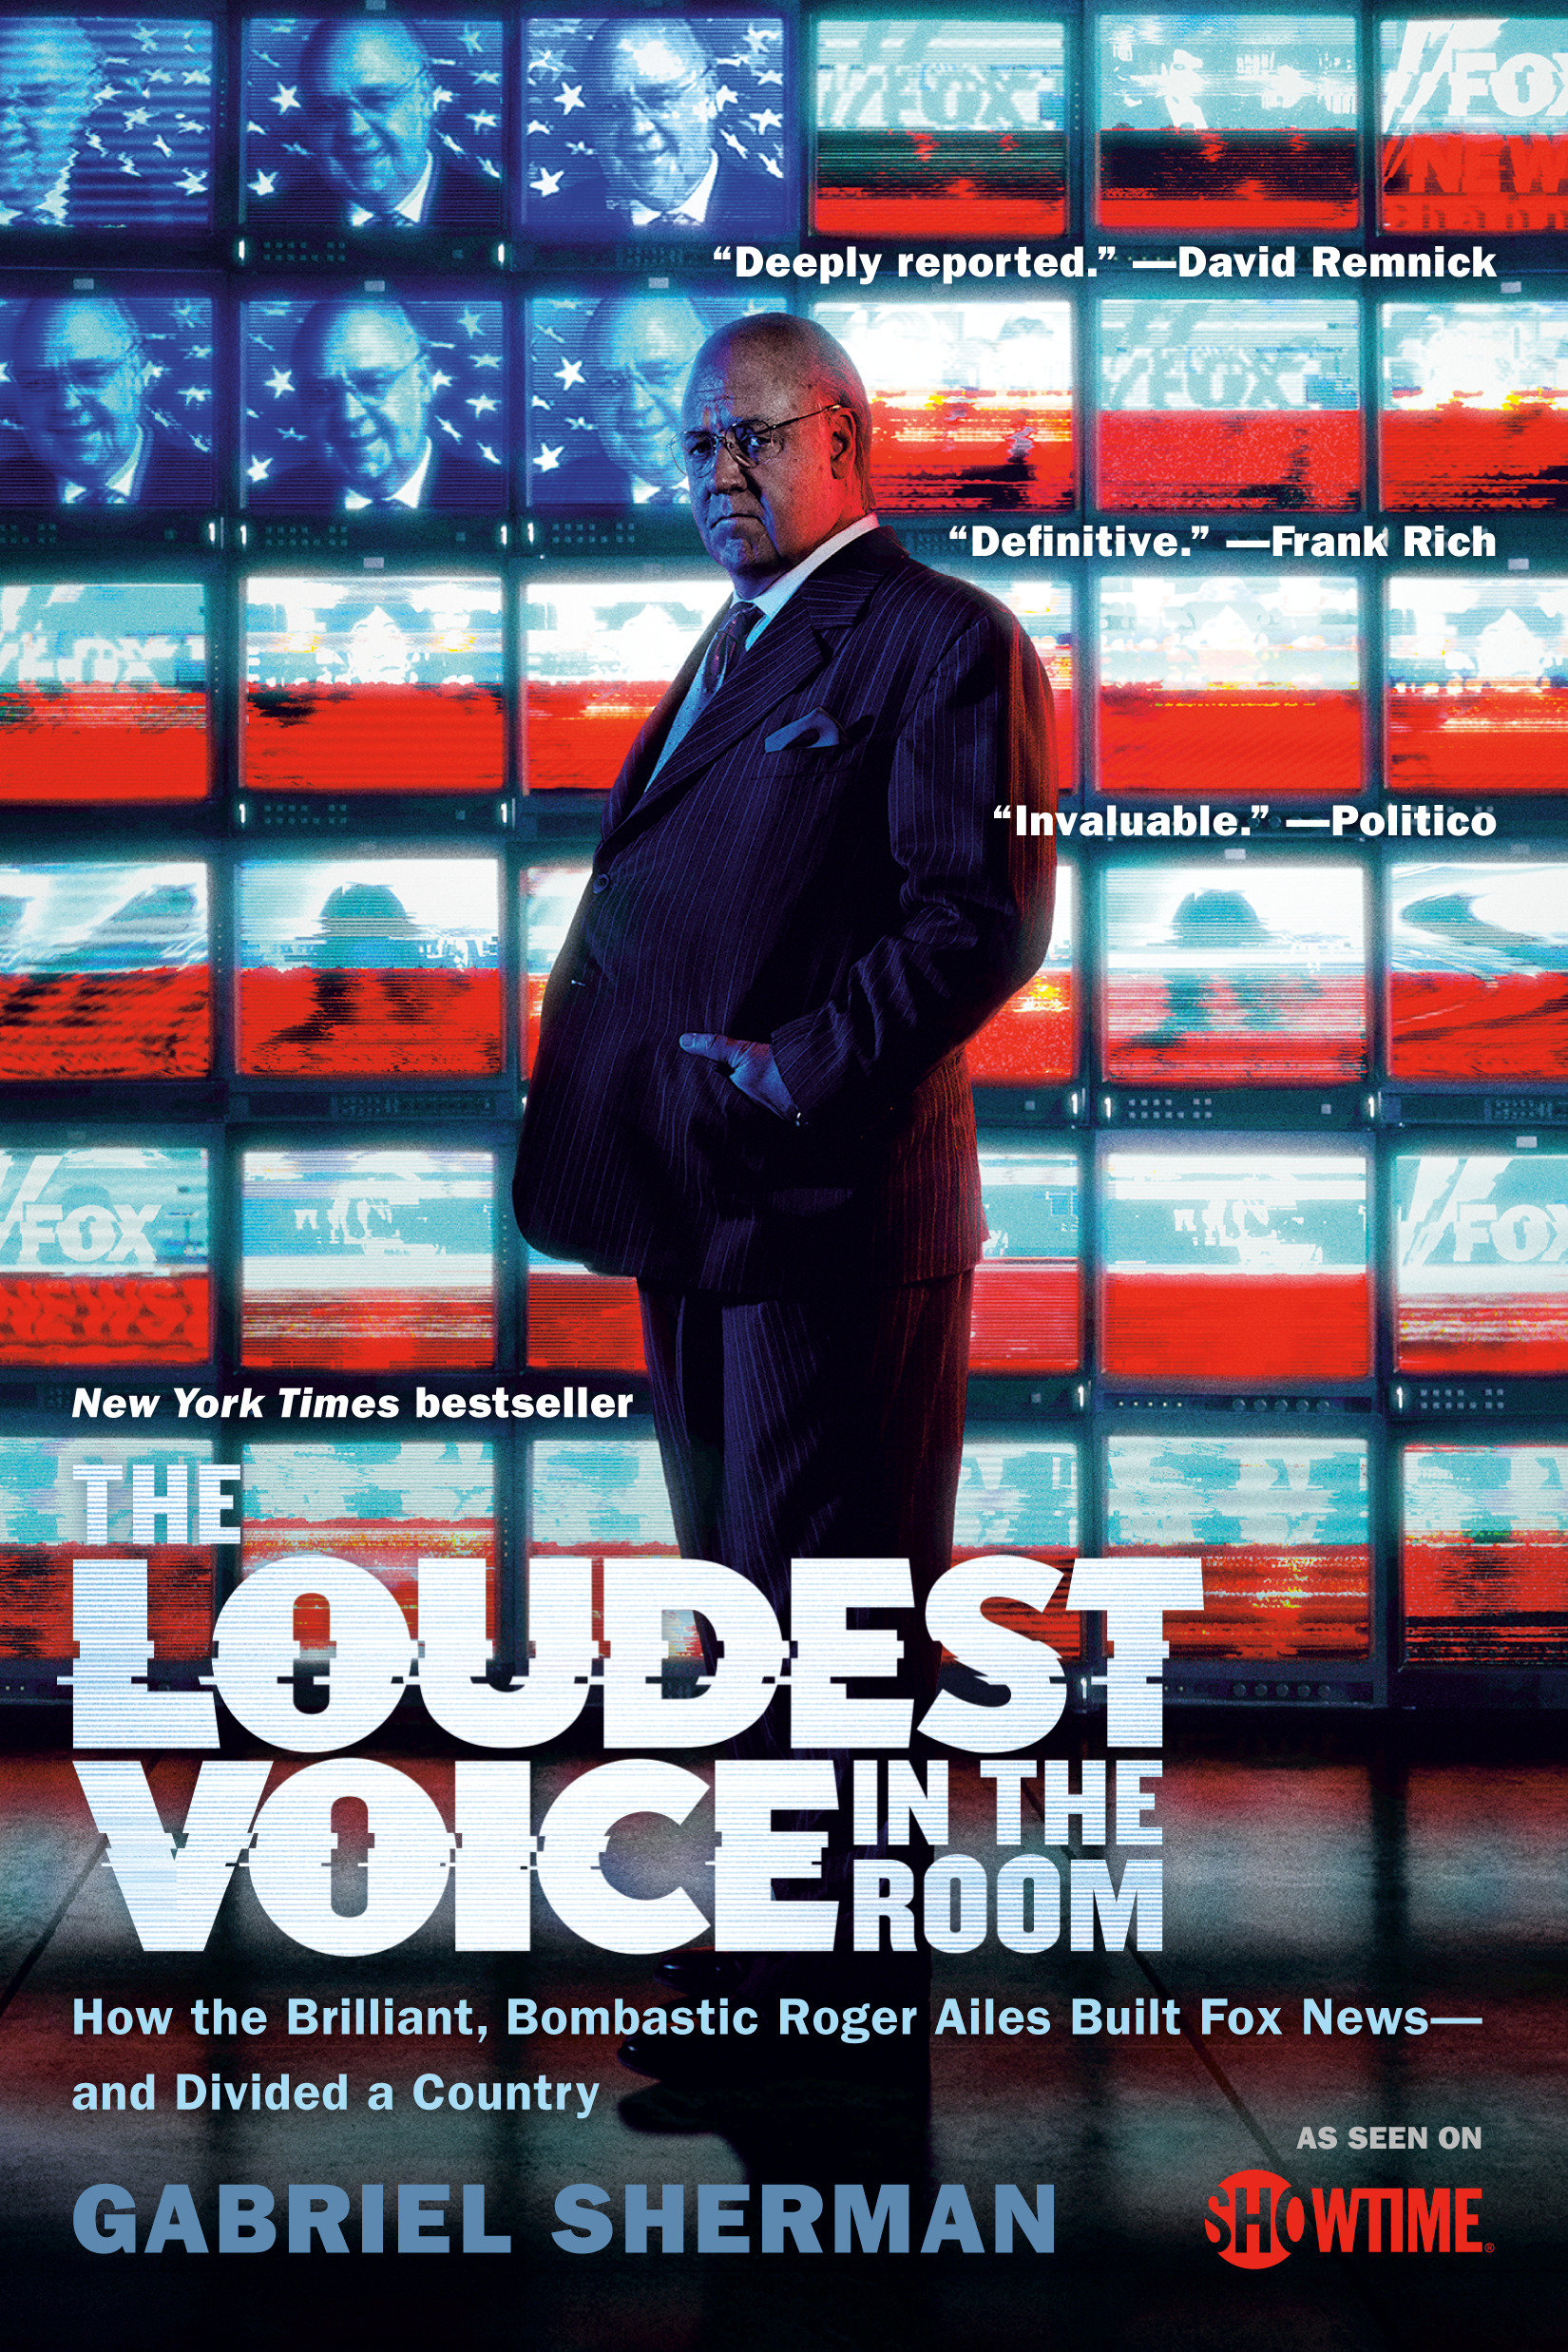 The loudest voice in the room how the brilliant, bombastic Roger Ailes built Fox News--and divided a country cover image